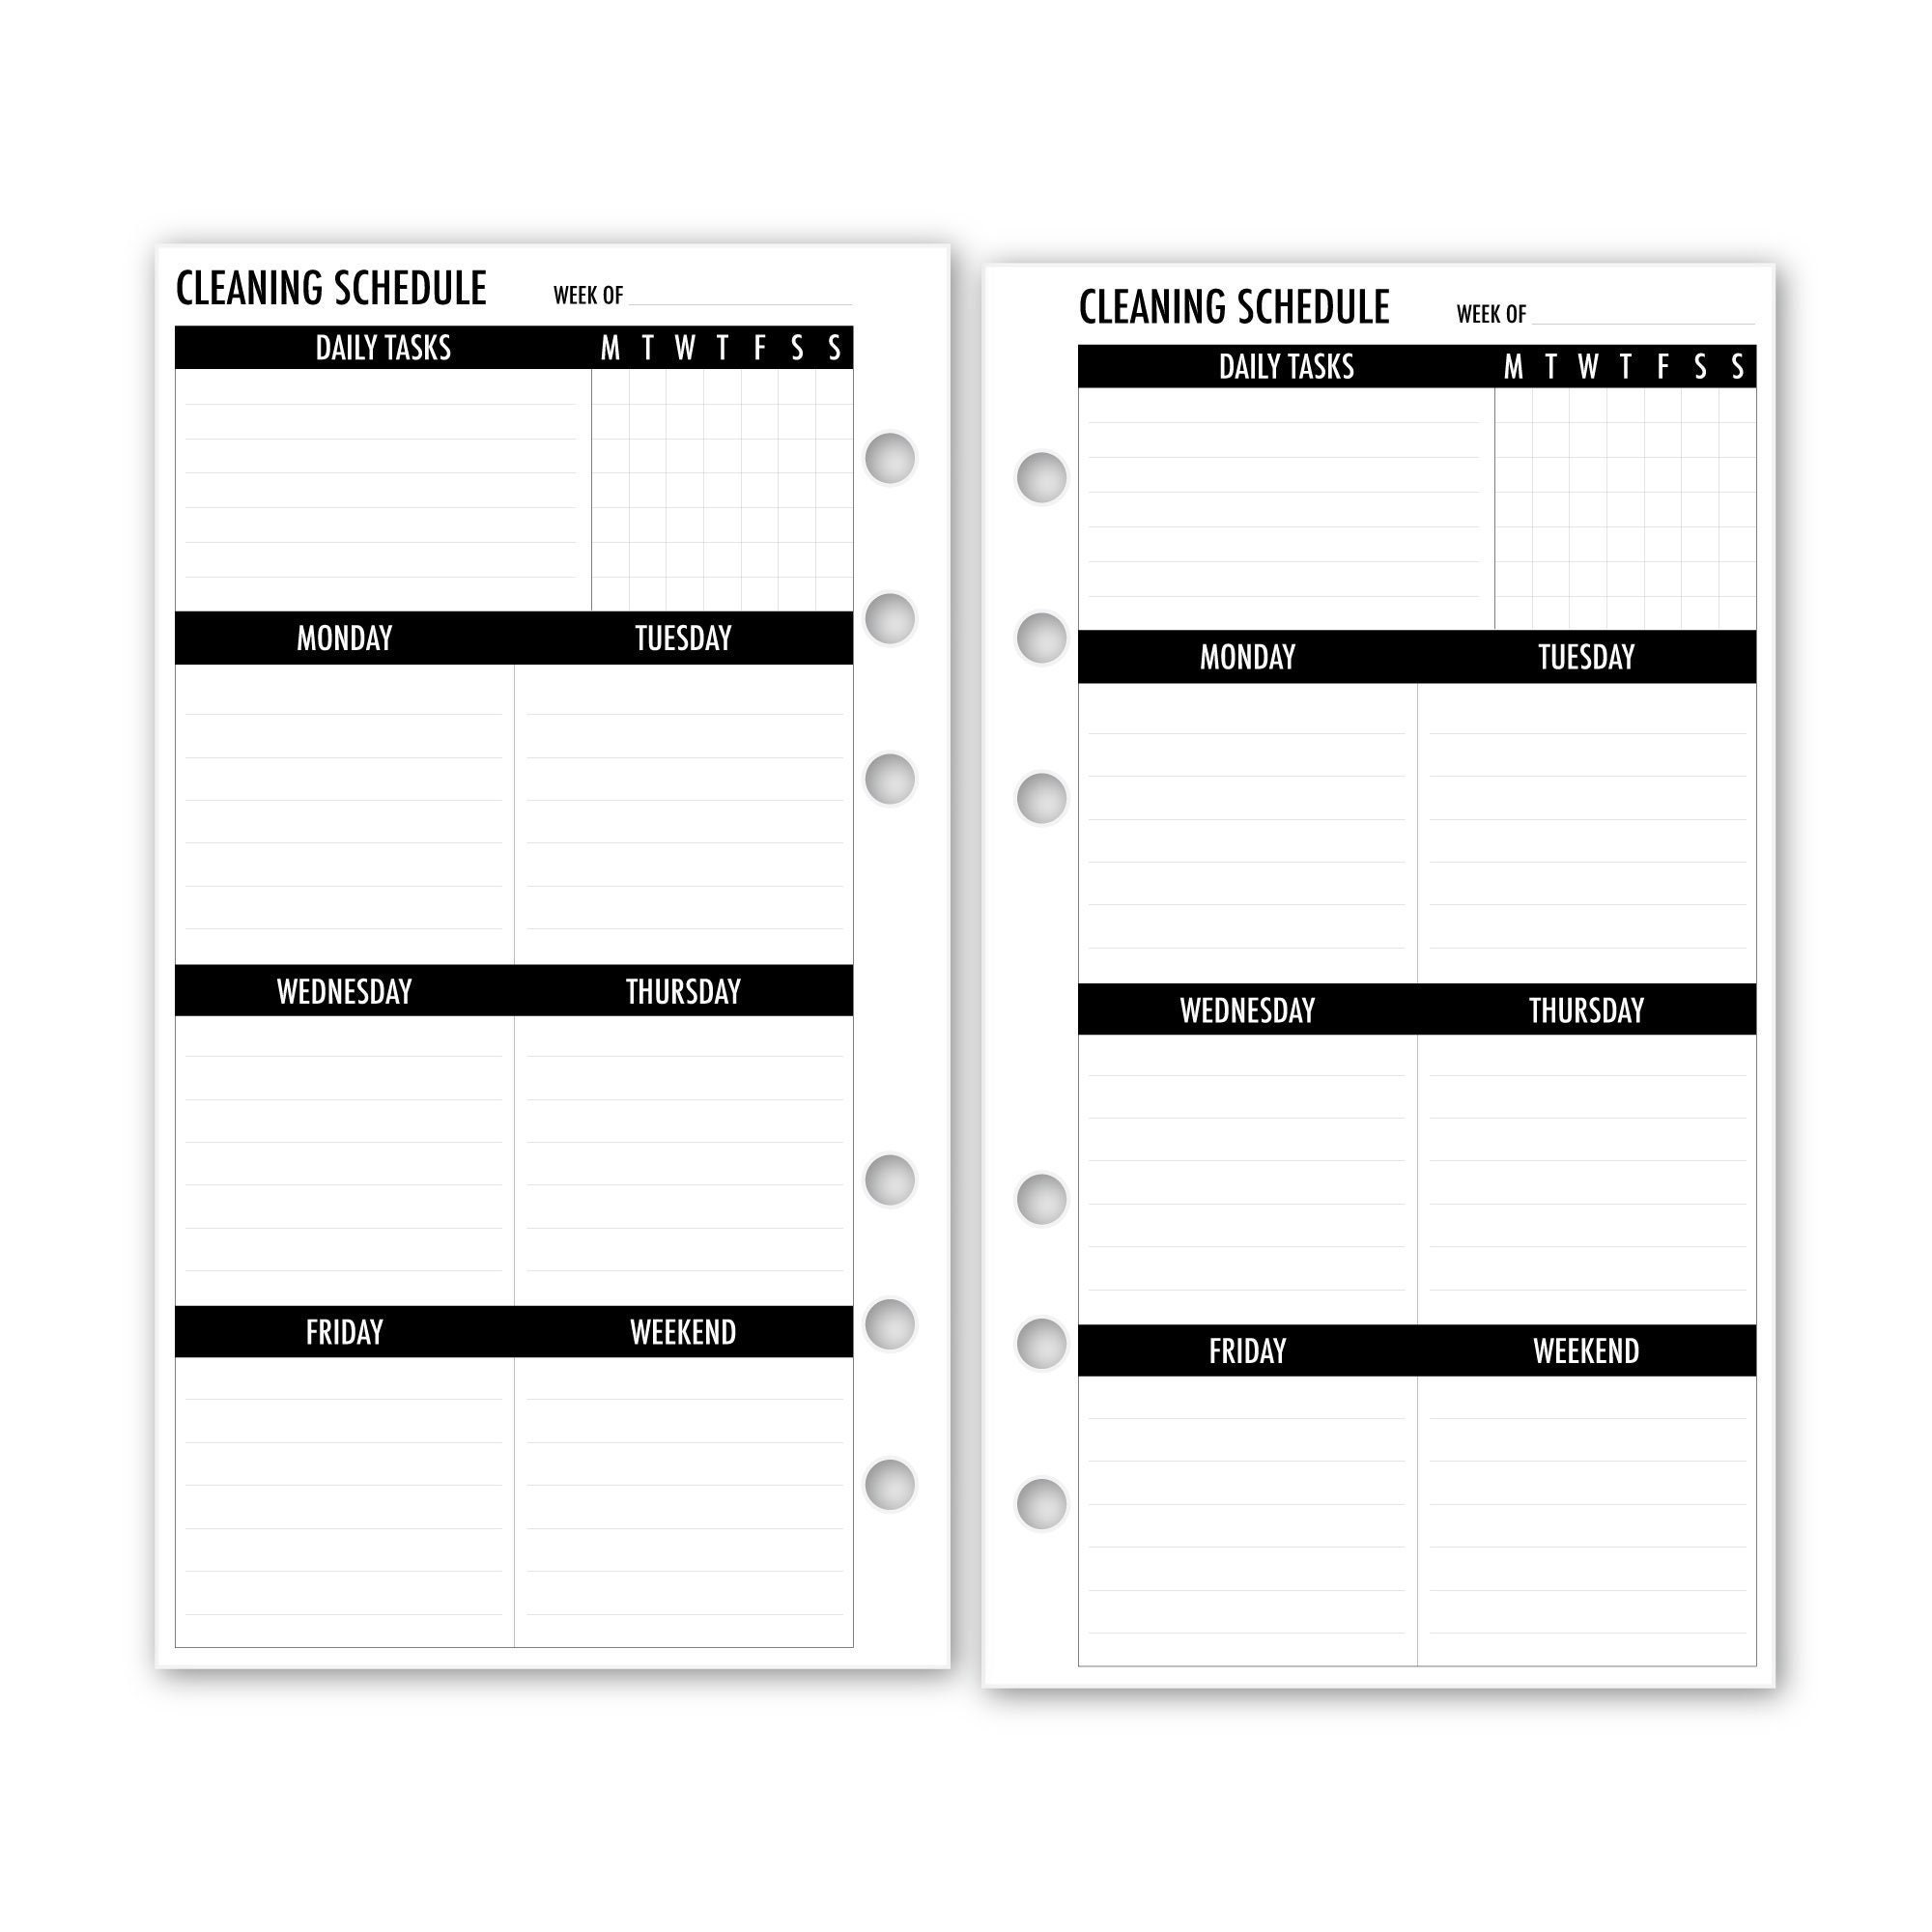  Personal Gift List Planner Insert Refill, 3.74 x 6.73 inches,  Pre-Punched for 6-Rings to Fit Filofax, LV MM, Kikki K, Moterm and Other  Binders, 30 Sheets Per Pack : Handmade Products